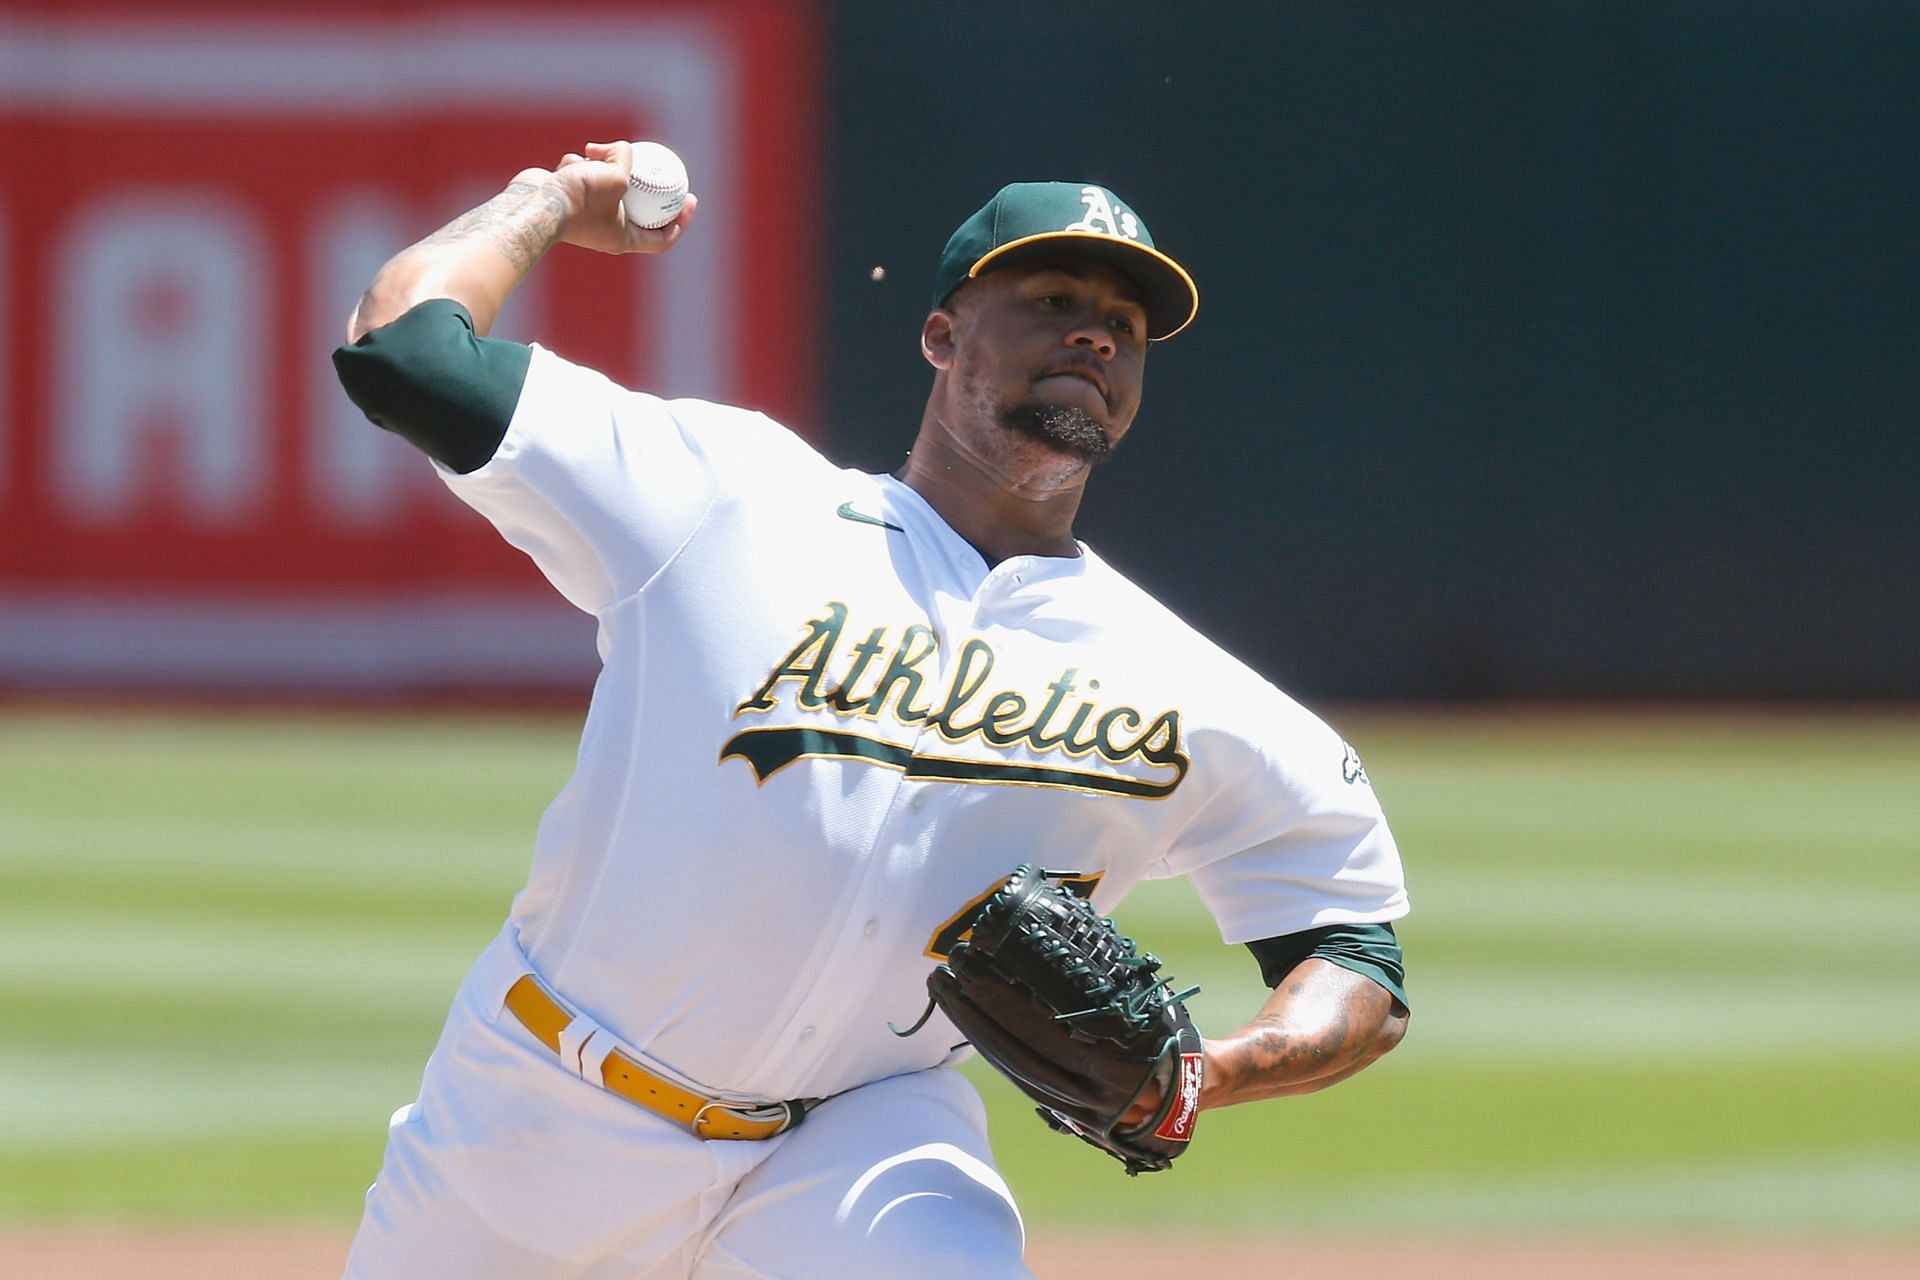 Oakland Athletics right hander Frankie Montas is in a position to pitch himself onto a contender if he&#039;s able to build on his 3.77 earned run average